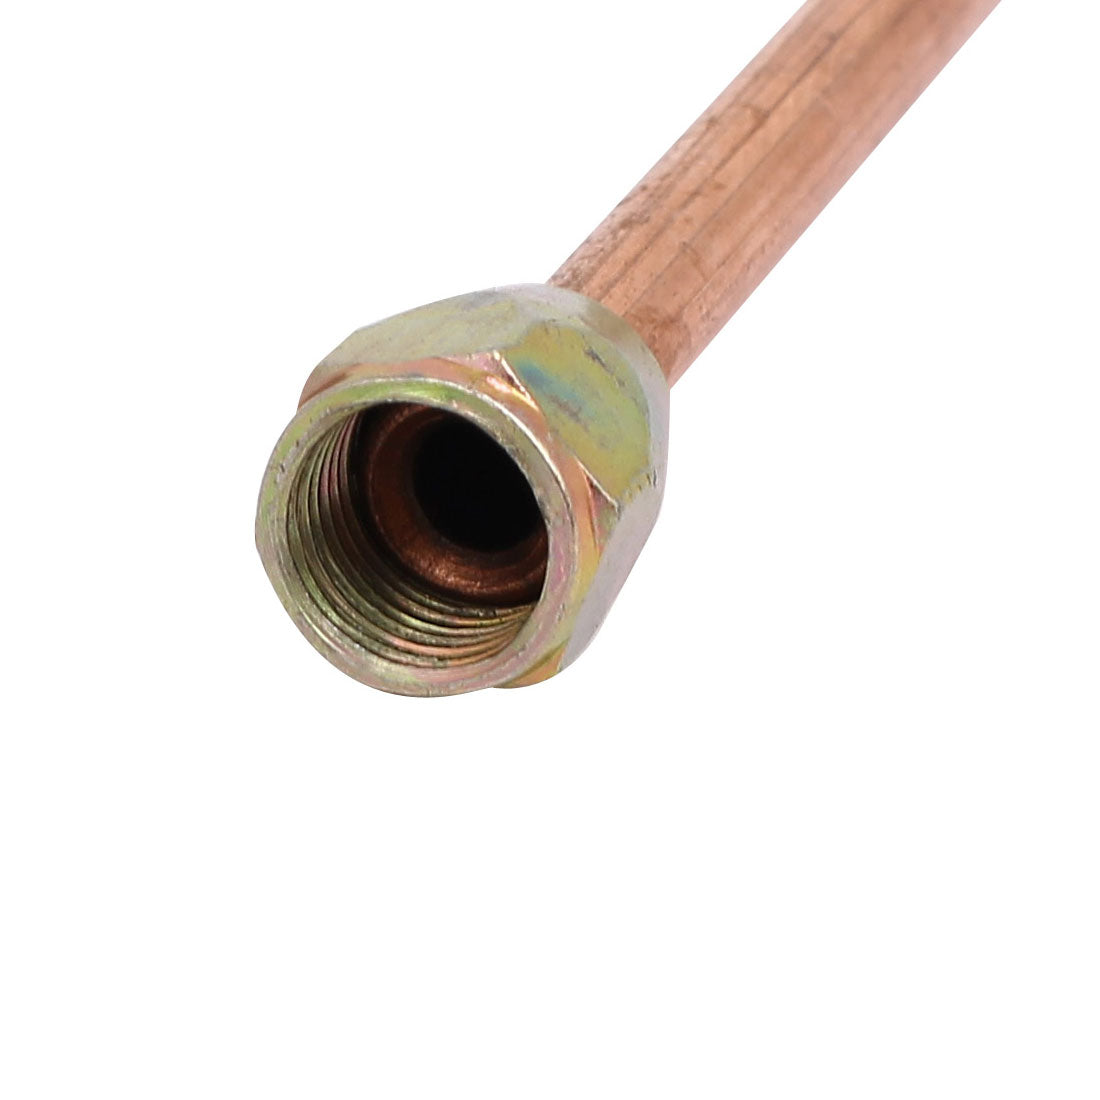 uxcell Uxcell G1/8 Hex Nut 400 Length Air Compressor Exhaust Tube Replacement Copper Tone